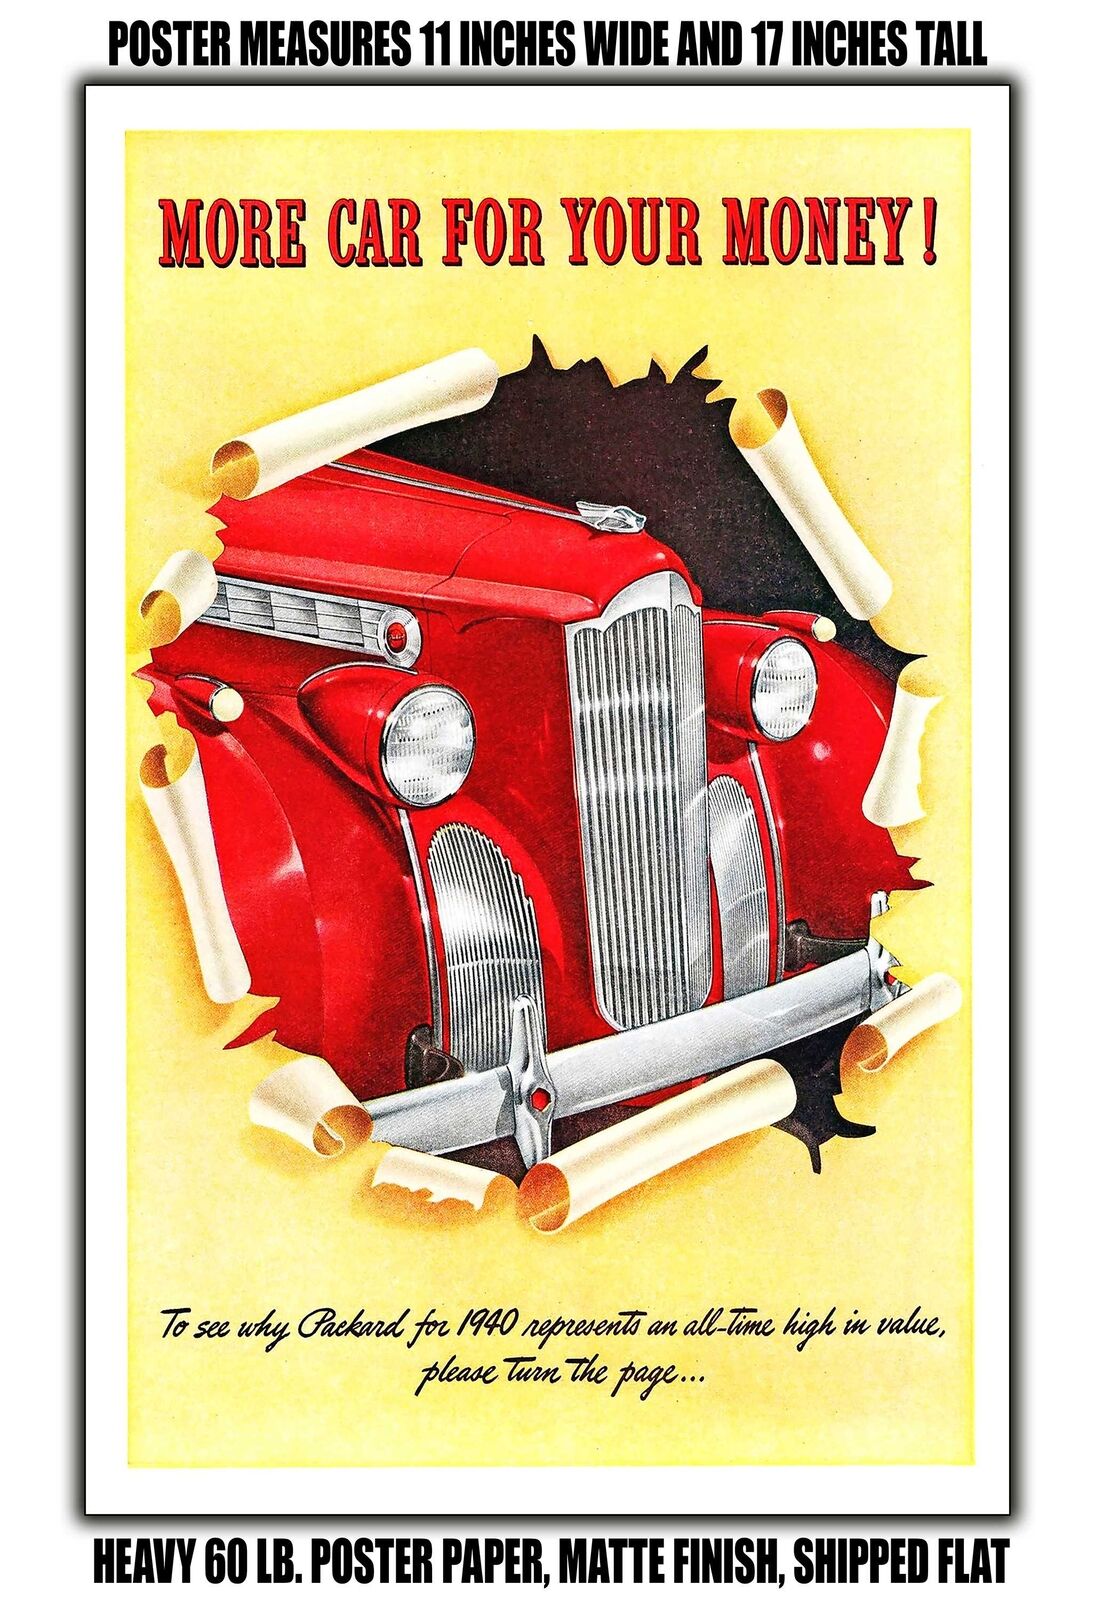 11x17 POSTER - 1940 Packard Introduction